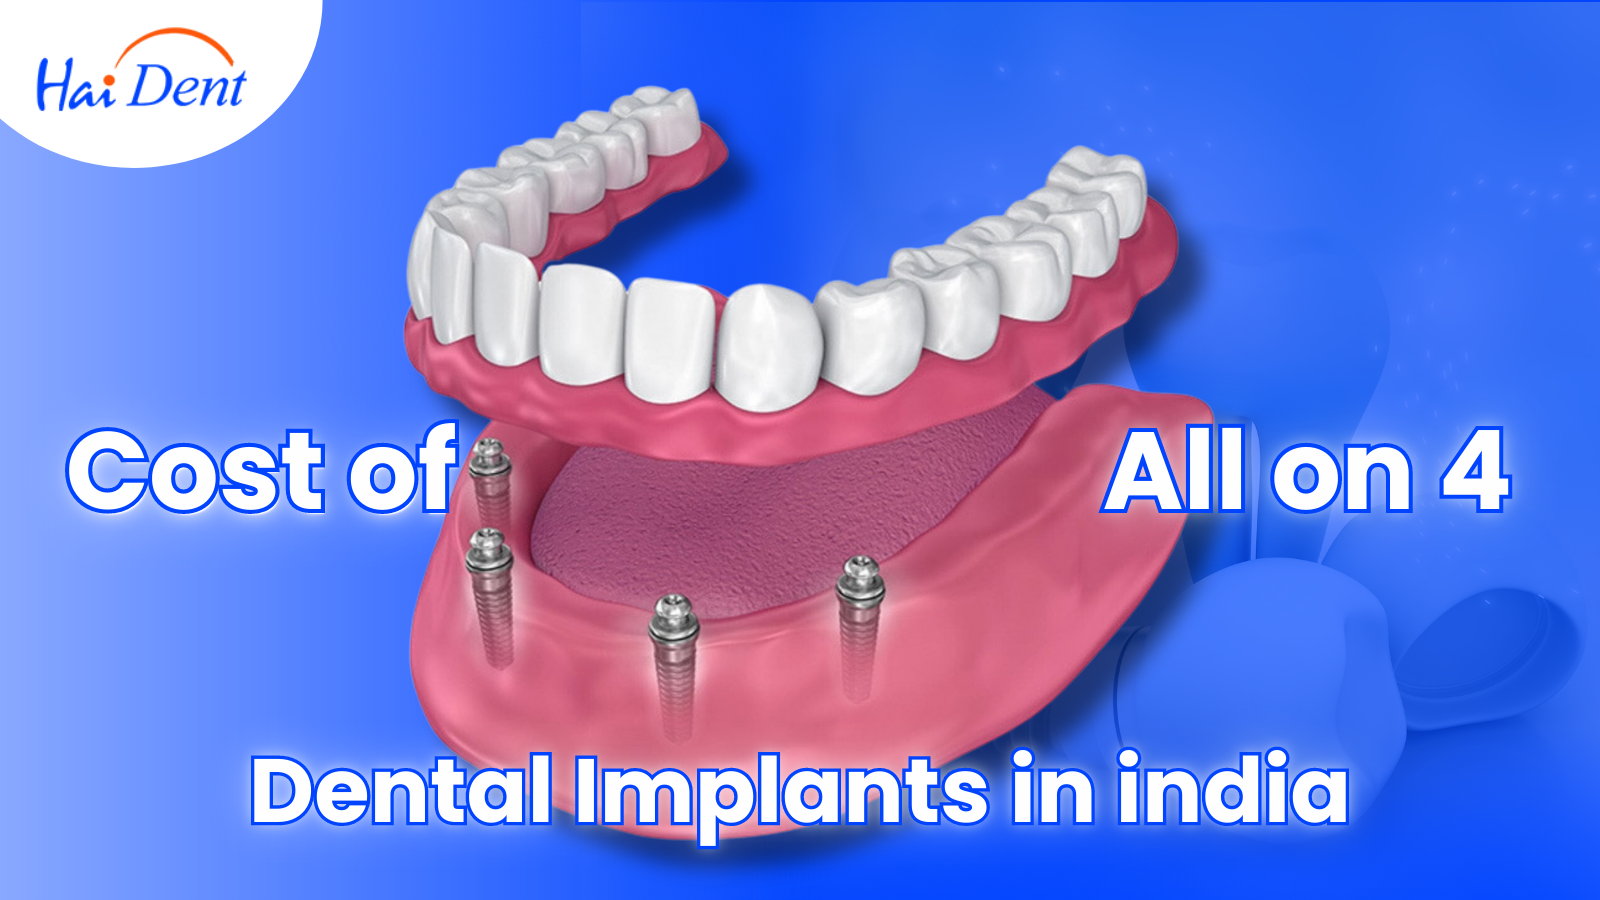 All-on-4 Dental Implants In India